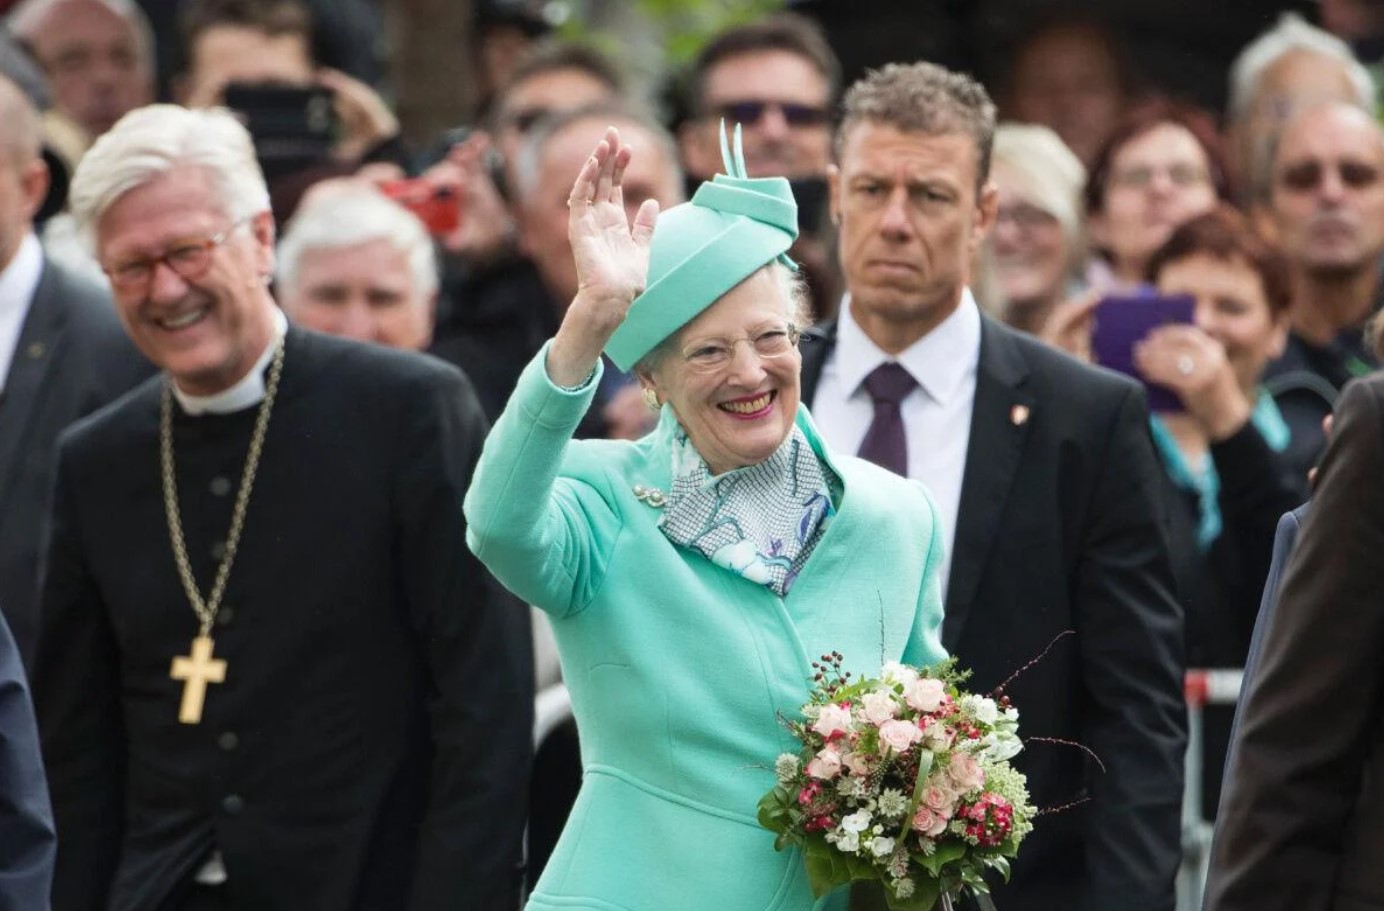 Queen Margrethe II of Denmark Passes Throne to Crown Prince Frederik X